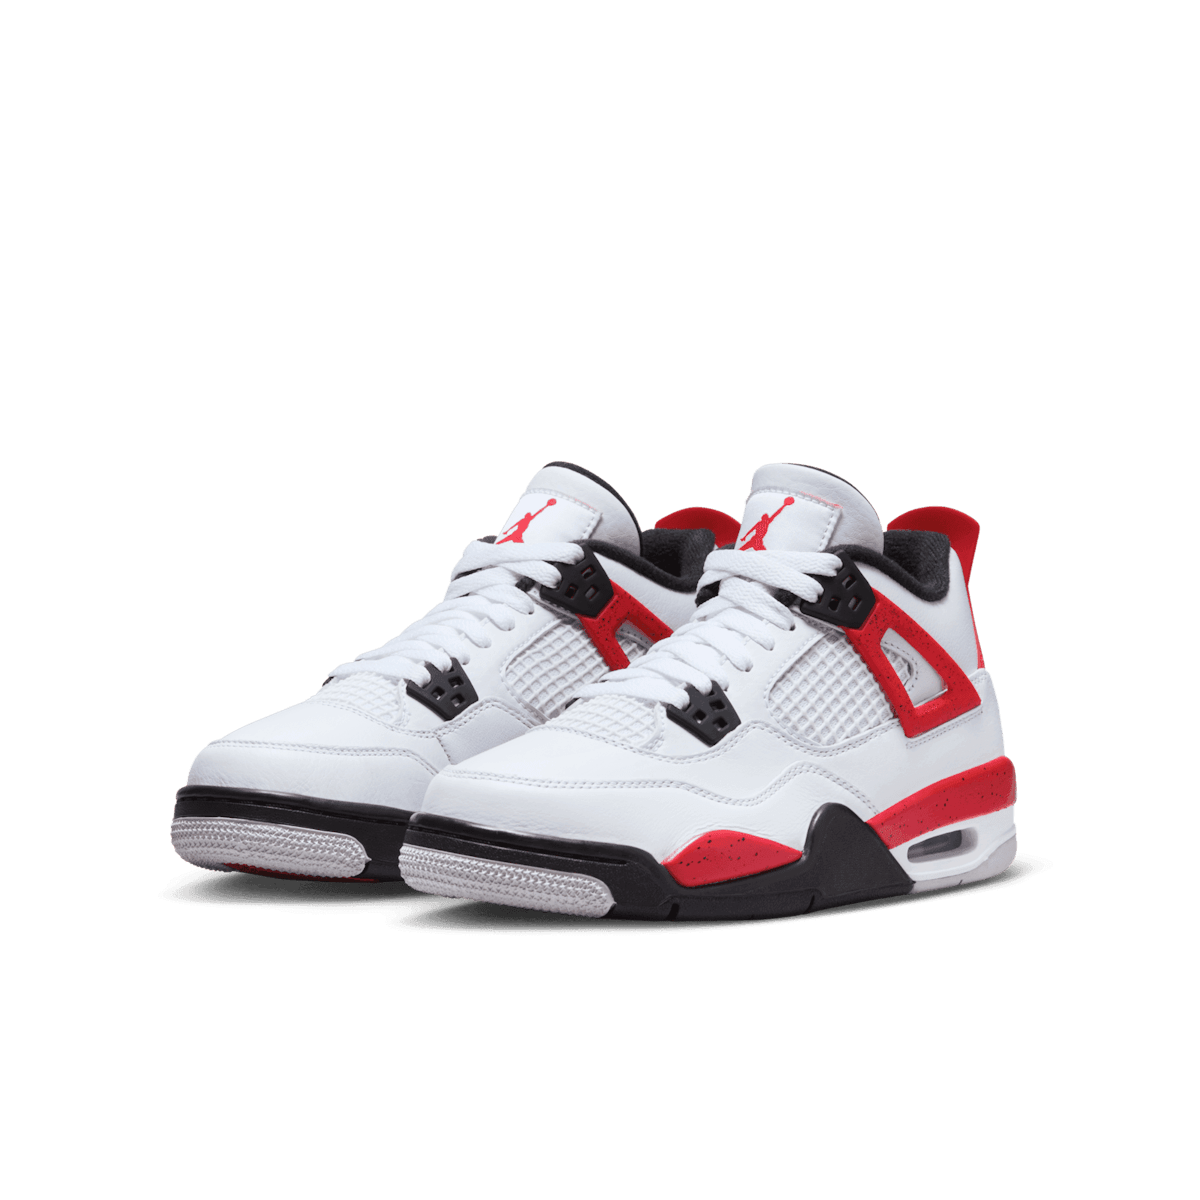 Air Jordan 4 'Red Cement' (DH6927-161) release date . Nike SNKRS NL